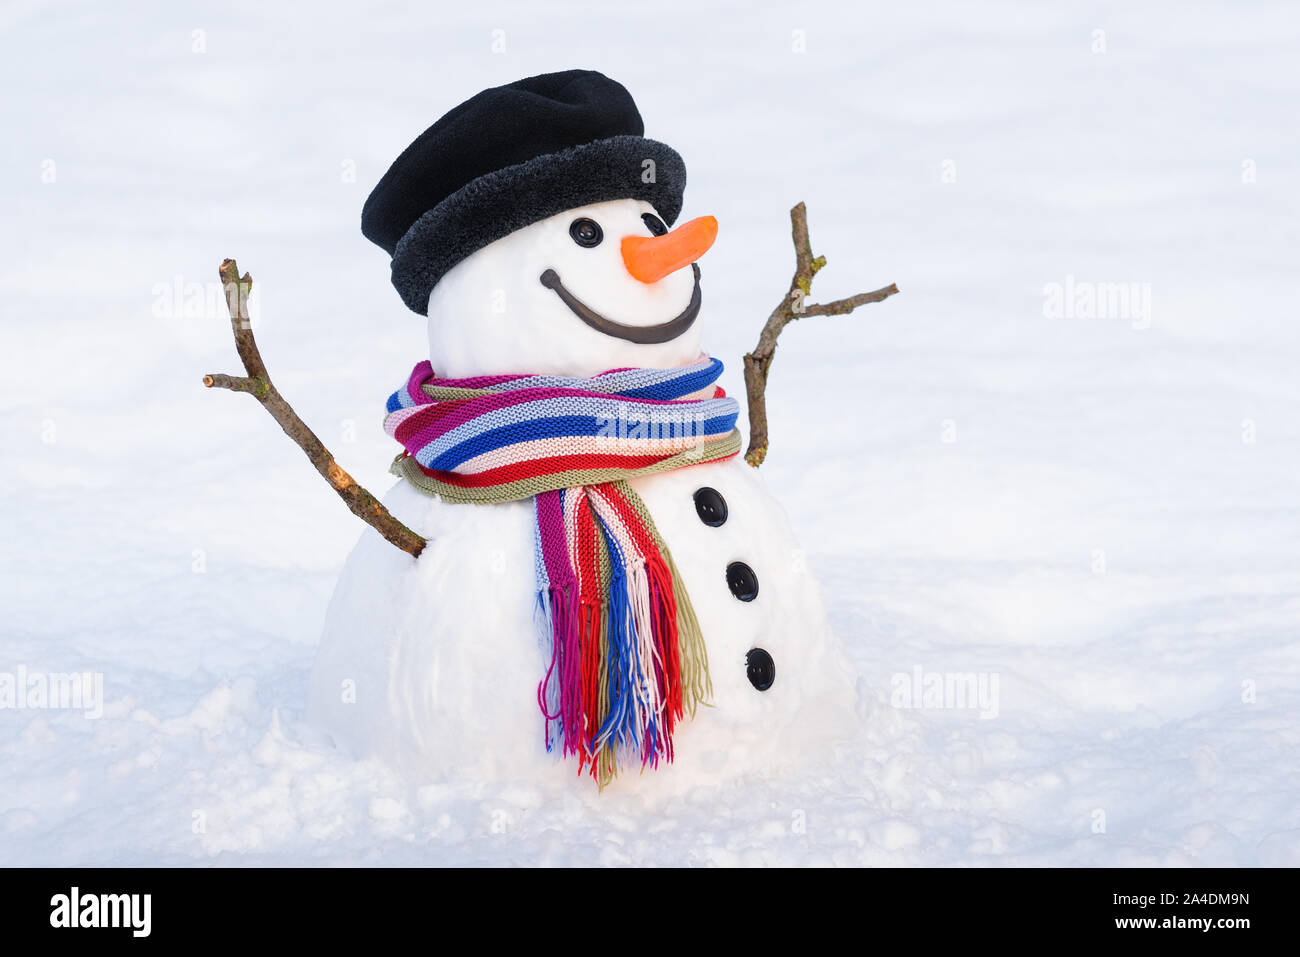 Magical Snowman with a sweet smile. Christmas card with traditional winter character Stock Photo